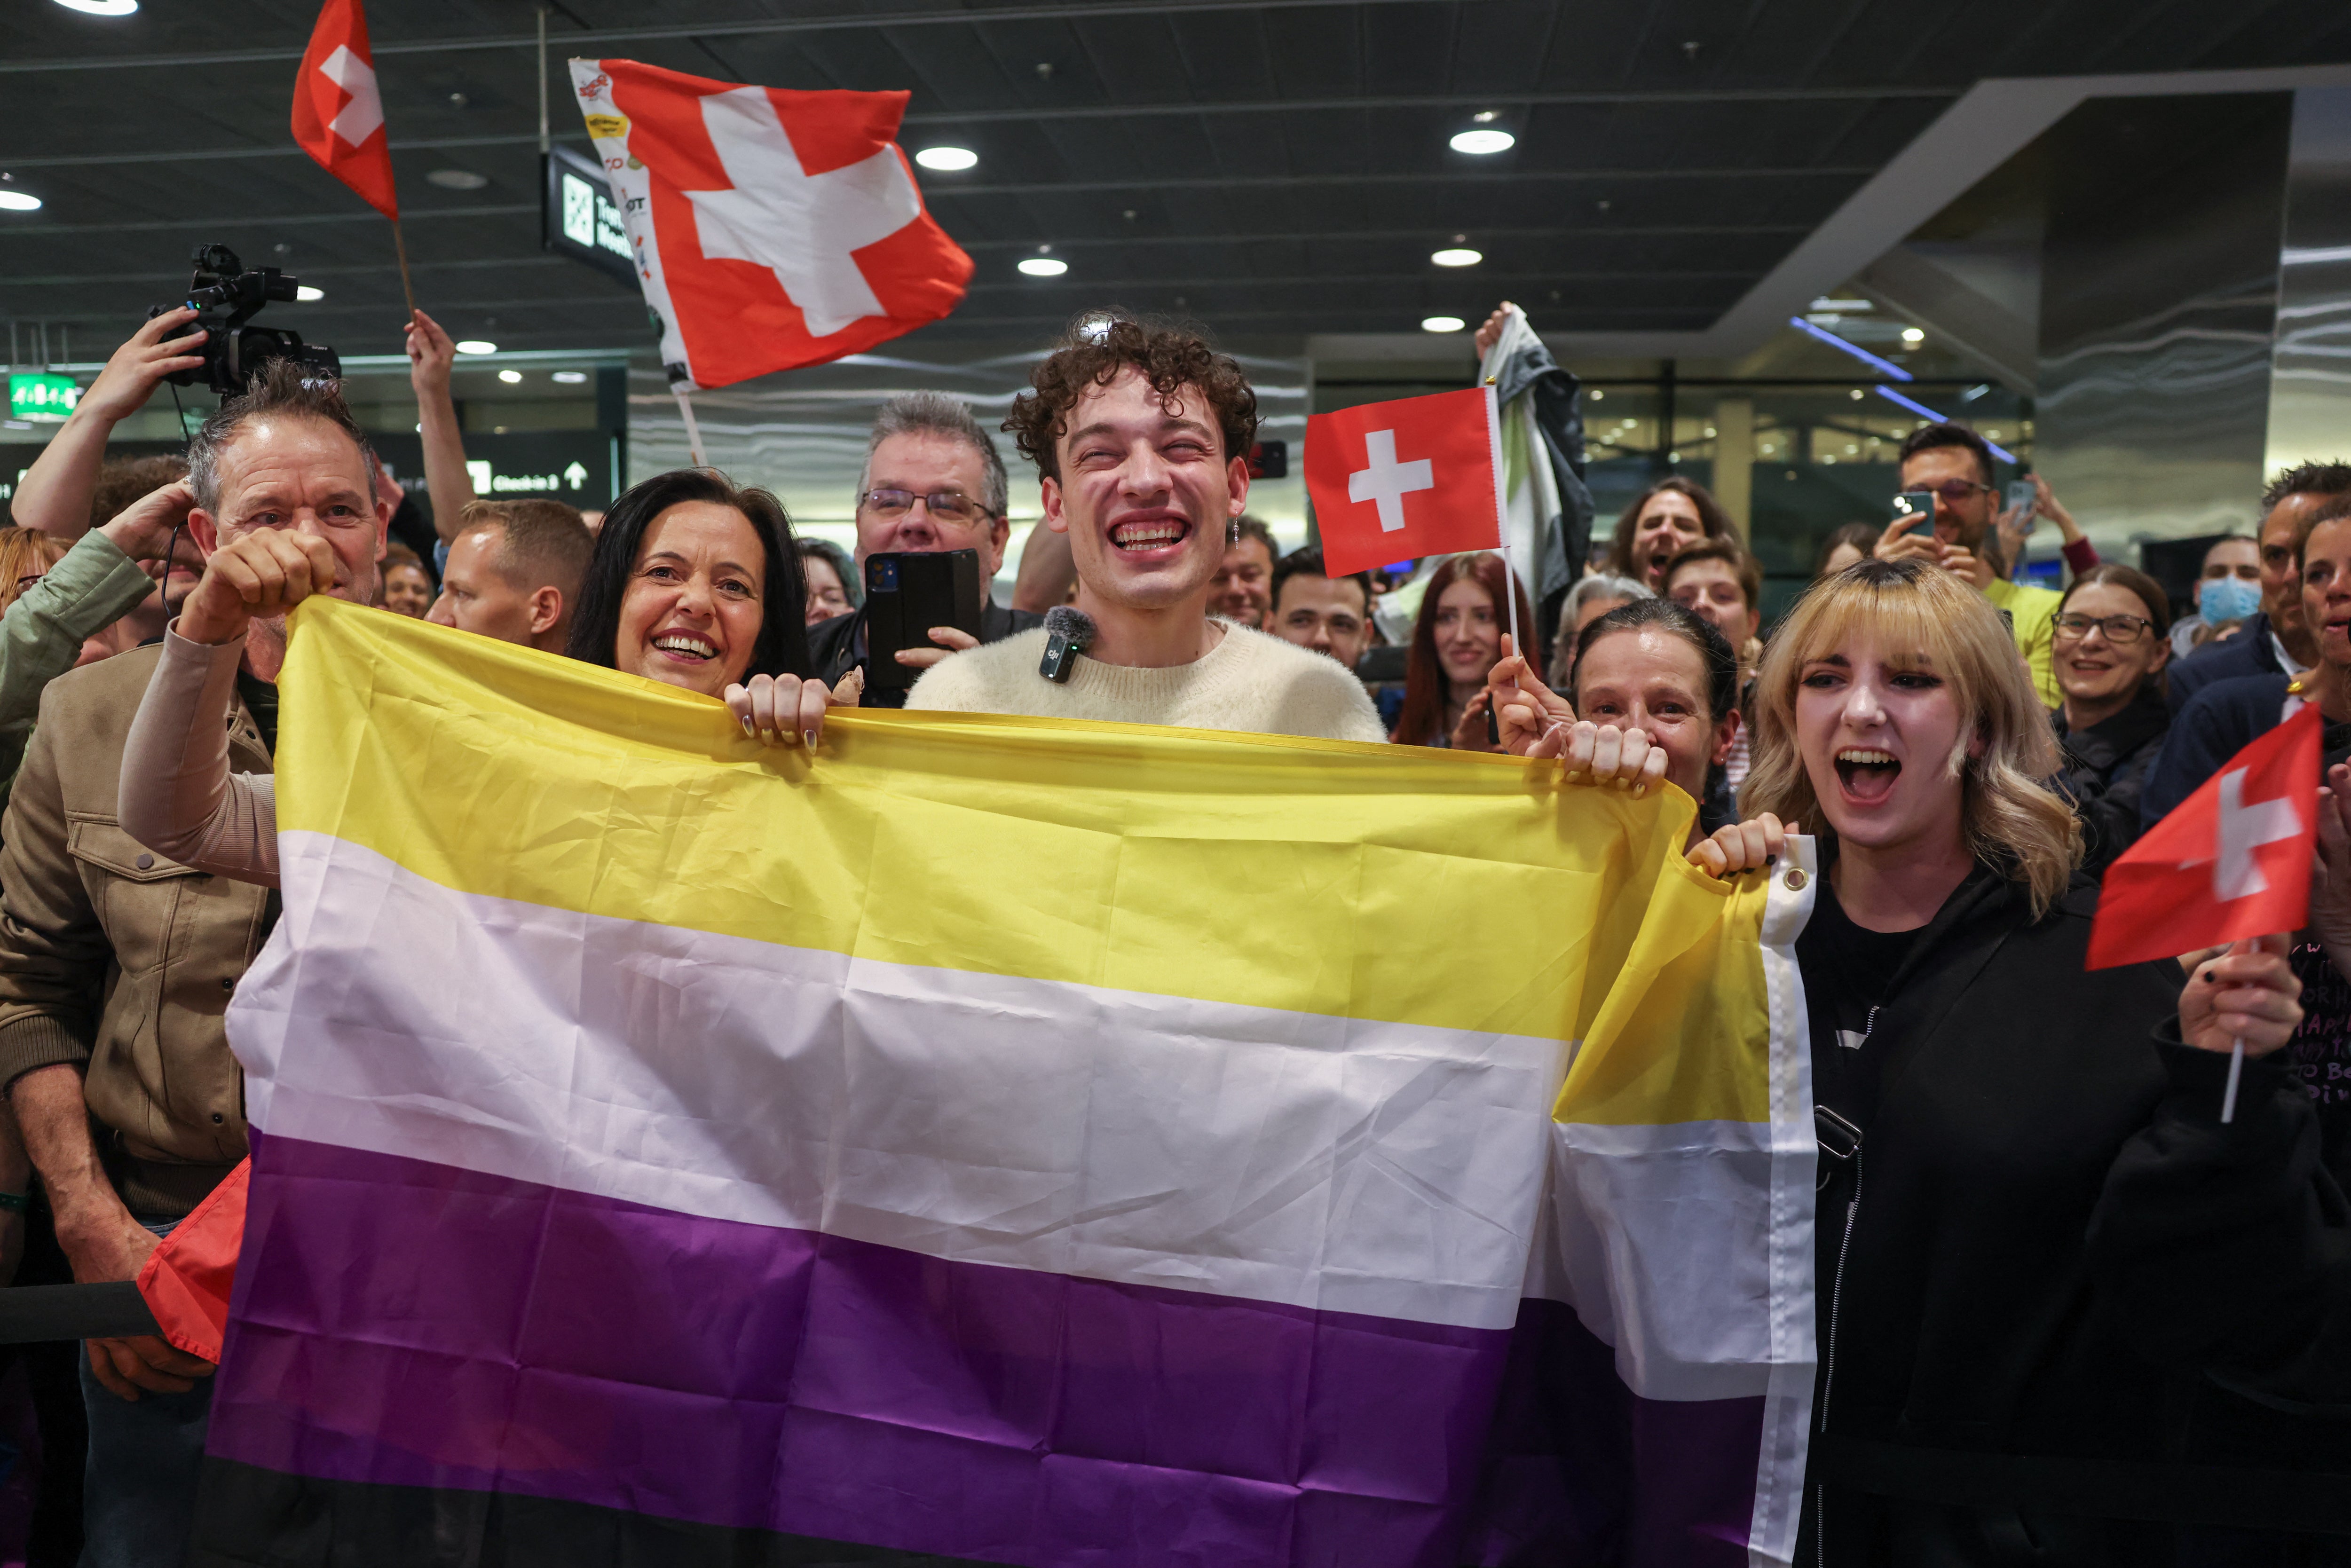 Nemo holding the non-binary flag with supporters at Zurich airport following their Eurovision win